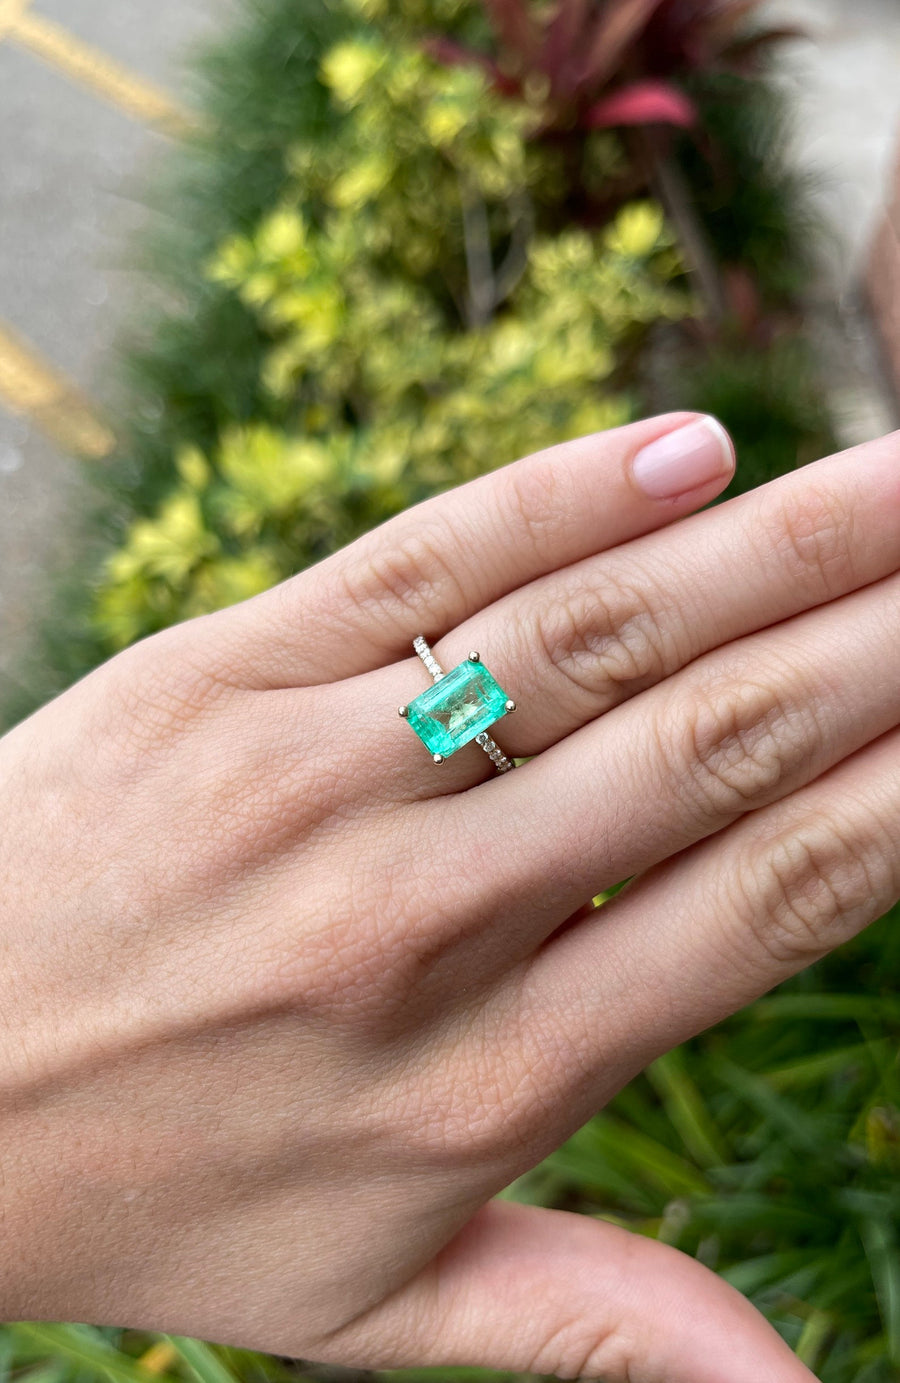 Diamond Accents Enhance 4.21tcw Emerald Cut Colombian Emerald Ring in 14K